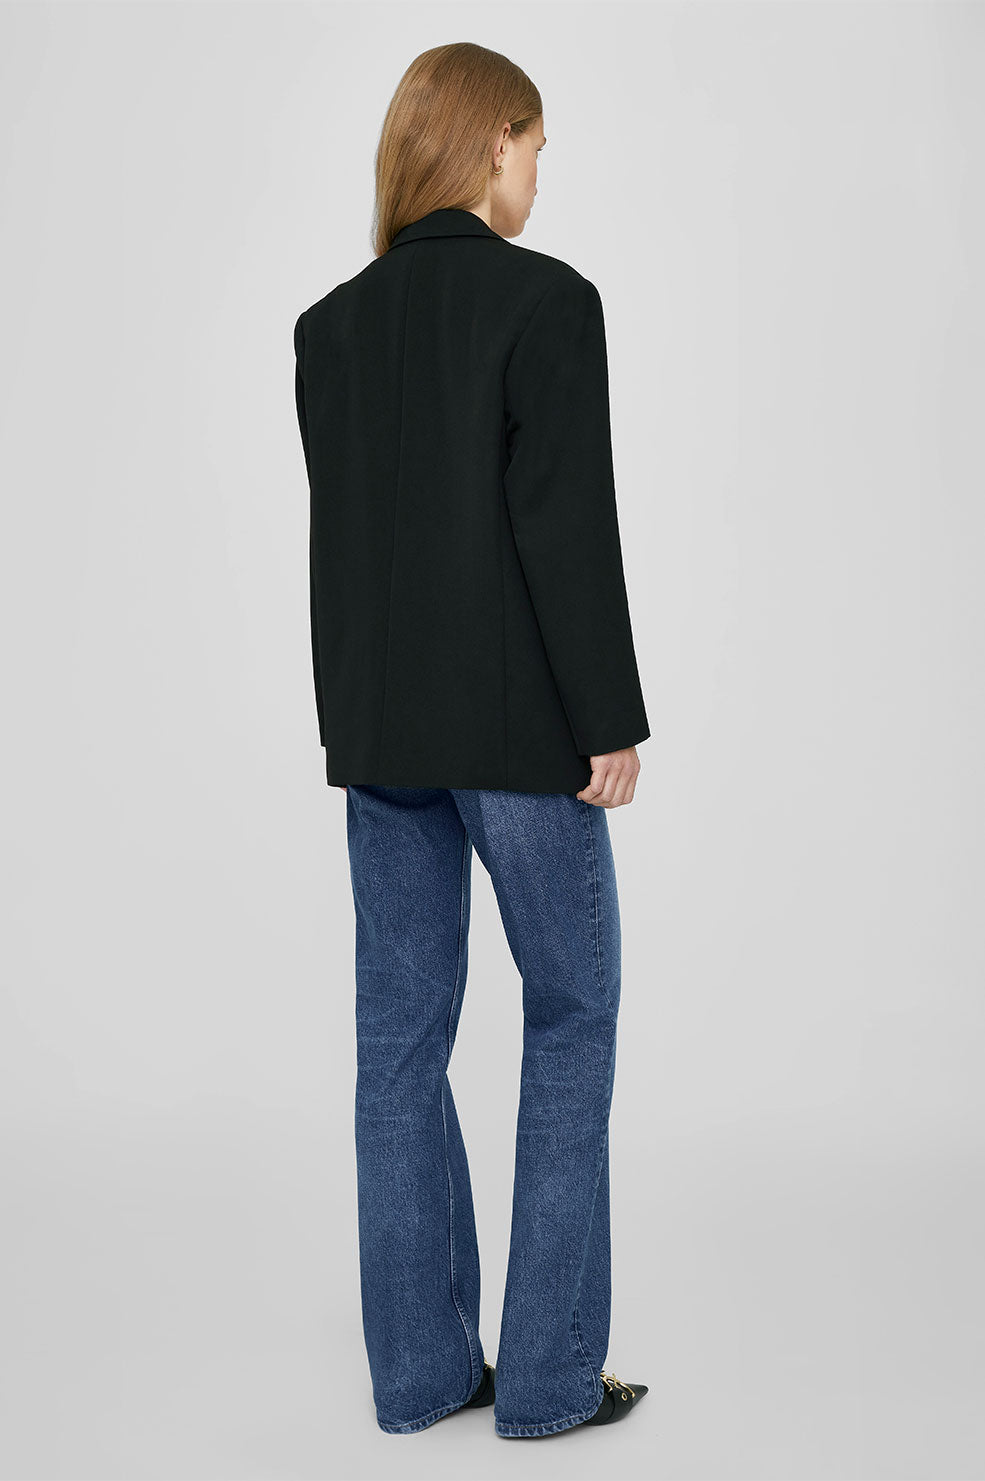 Anine Bing Quinn Blazer in Black available at TNT The New Trend Australia.